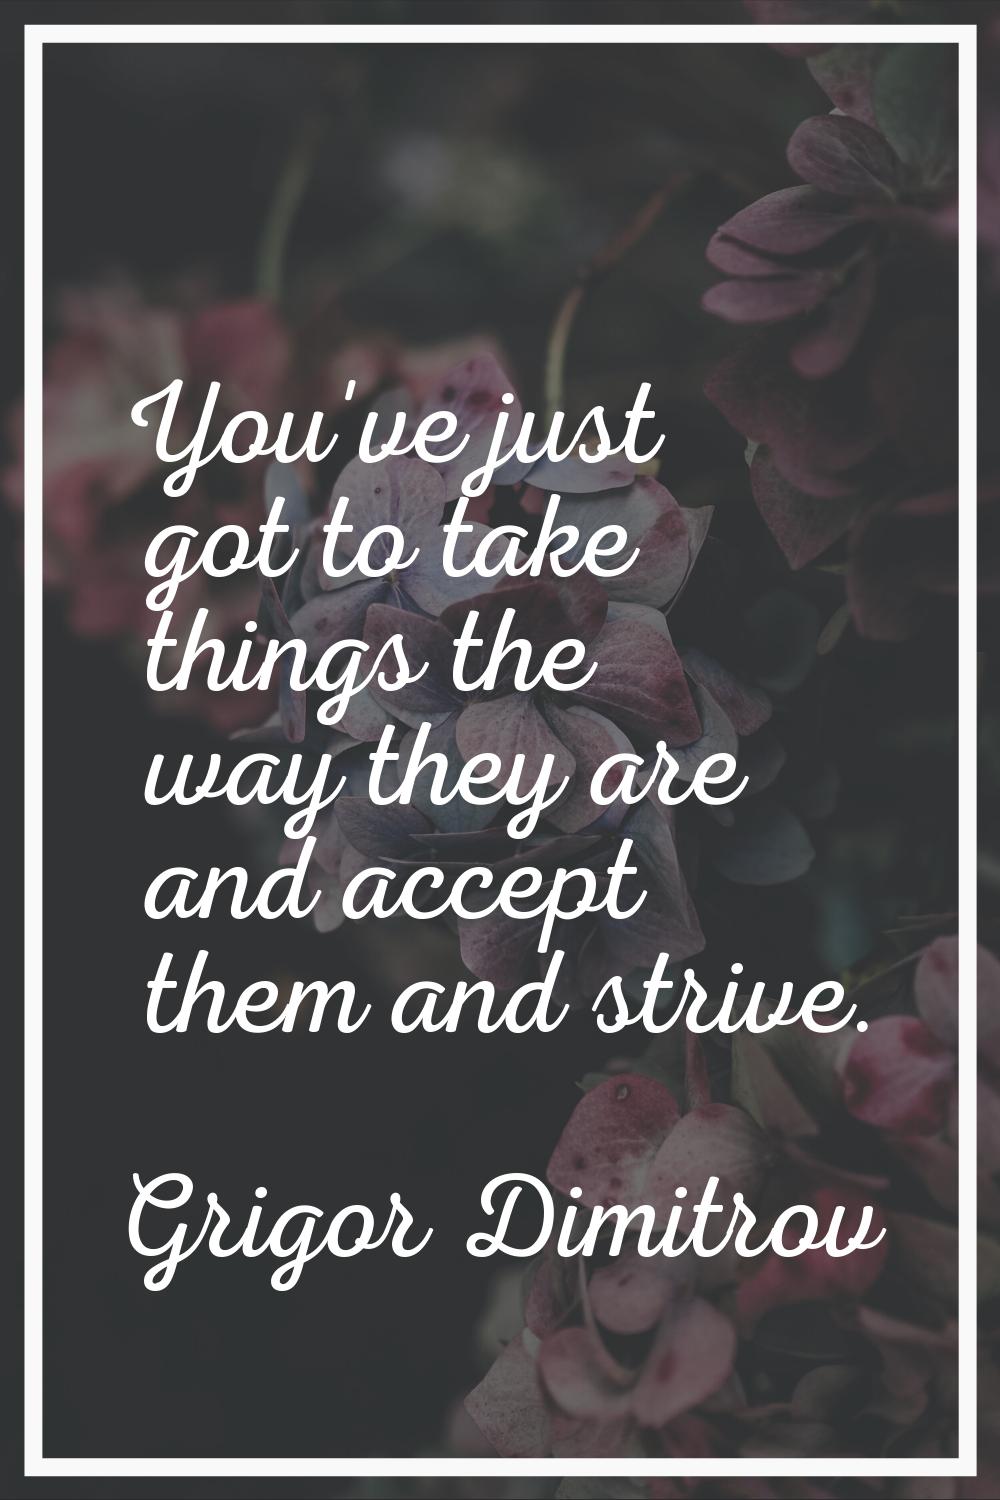 You've just got to take things the way they are and accept them and strive.